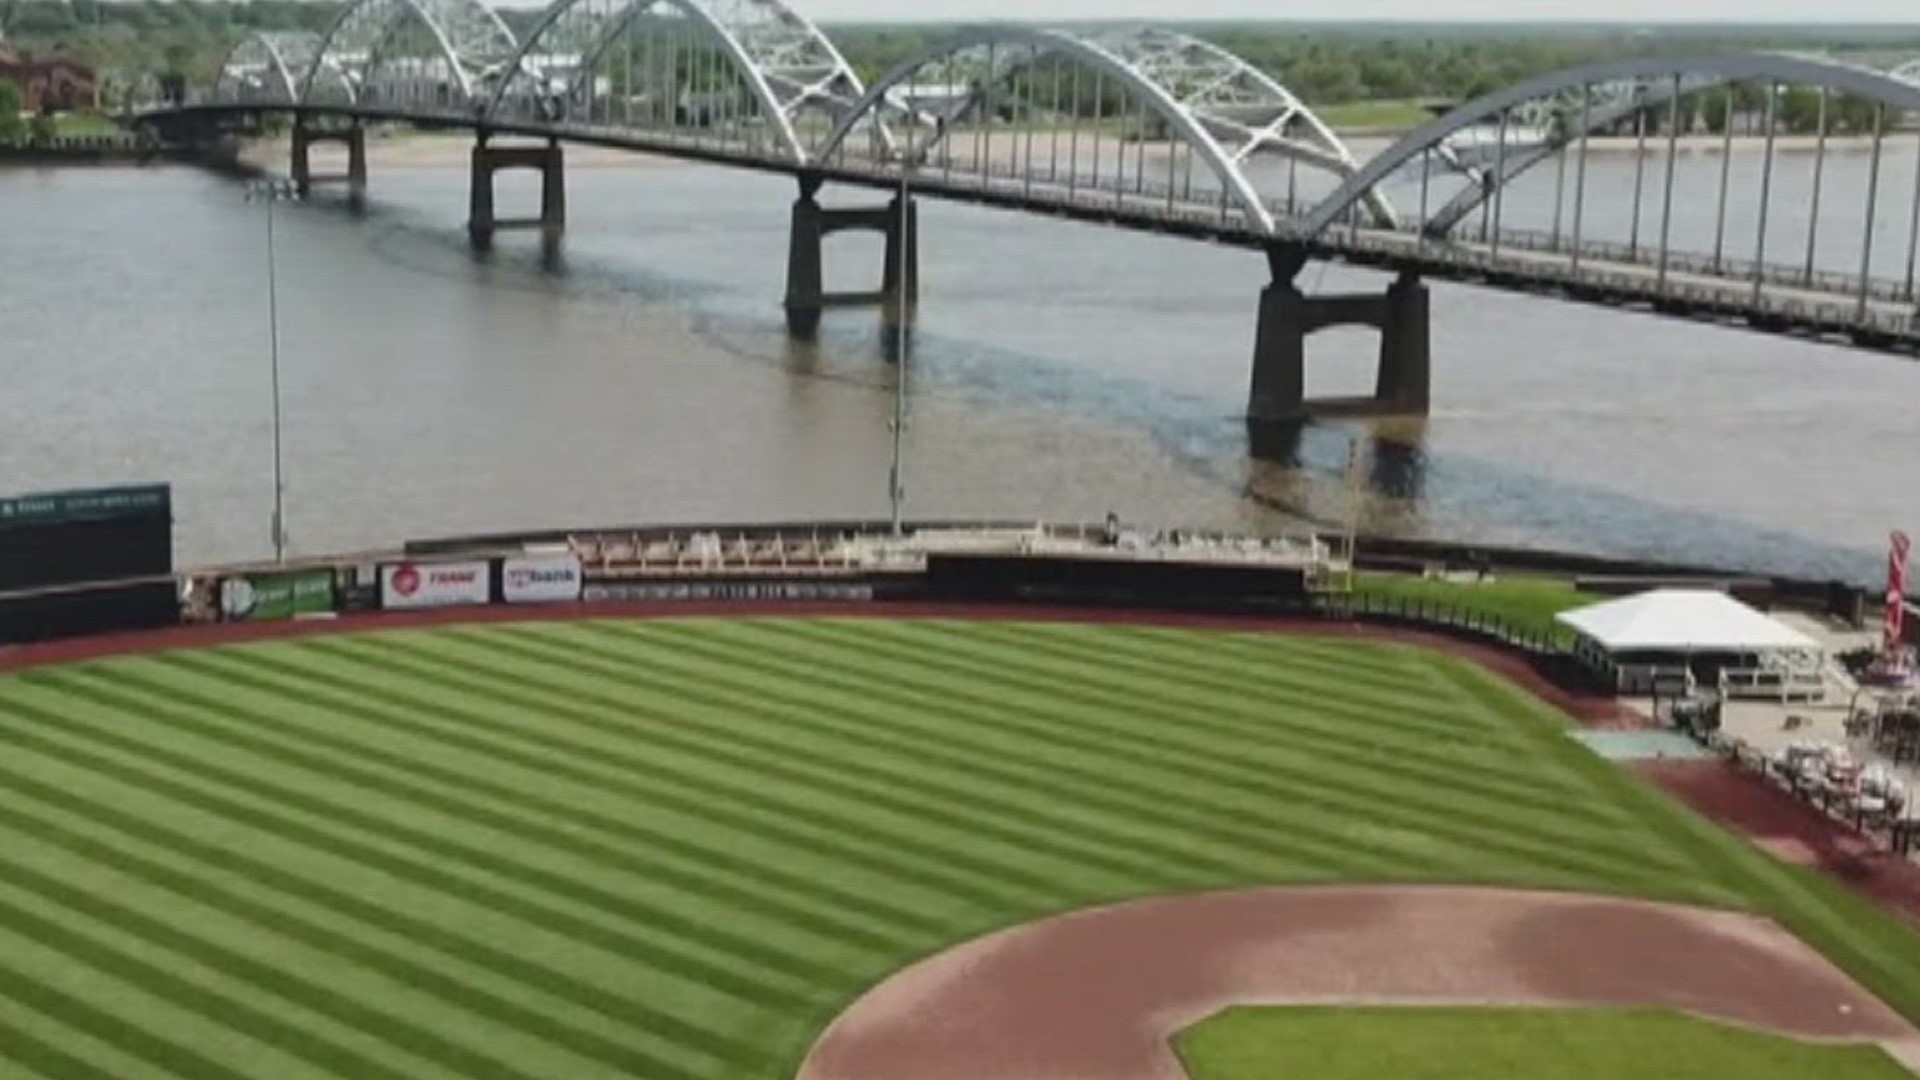 The River Bandits will replace the current field and extend protective netting to the foul pole.